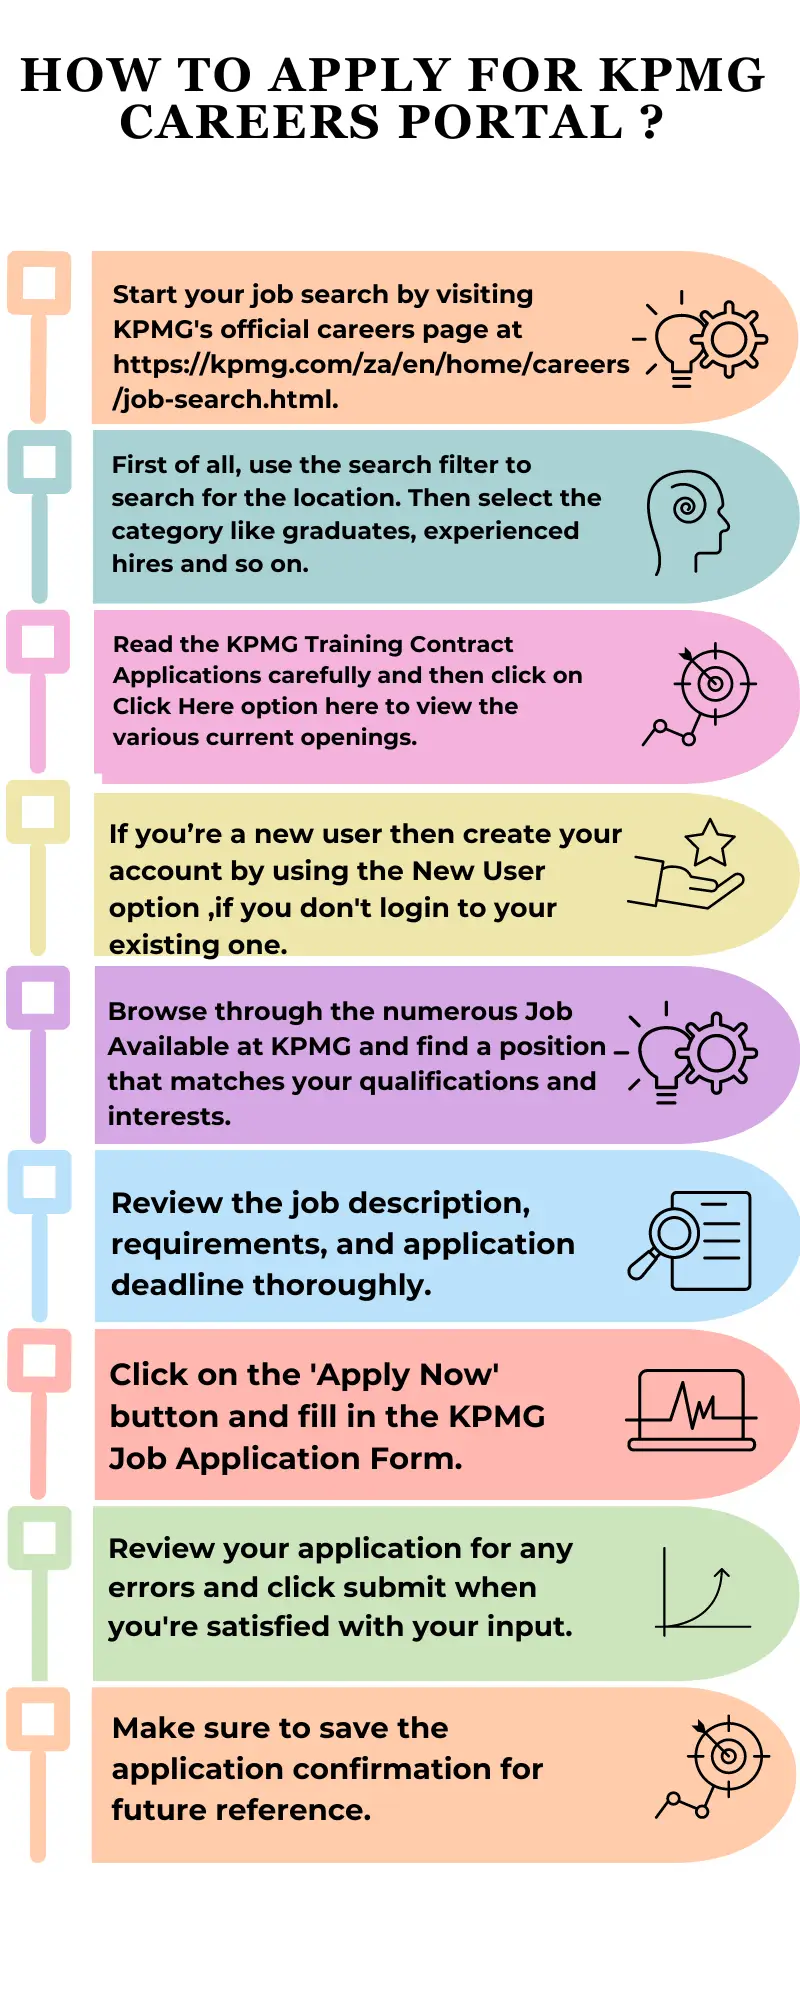 How To Apply for KPMG Careers Portal ?